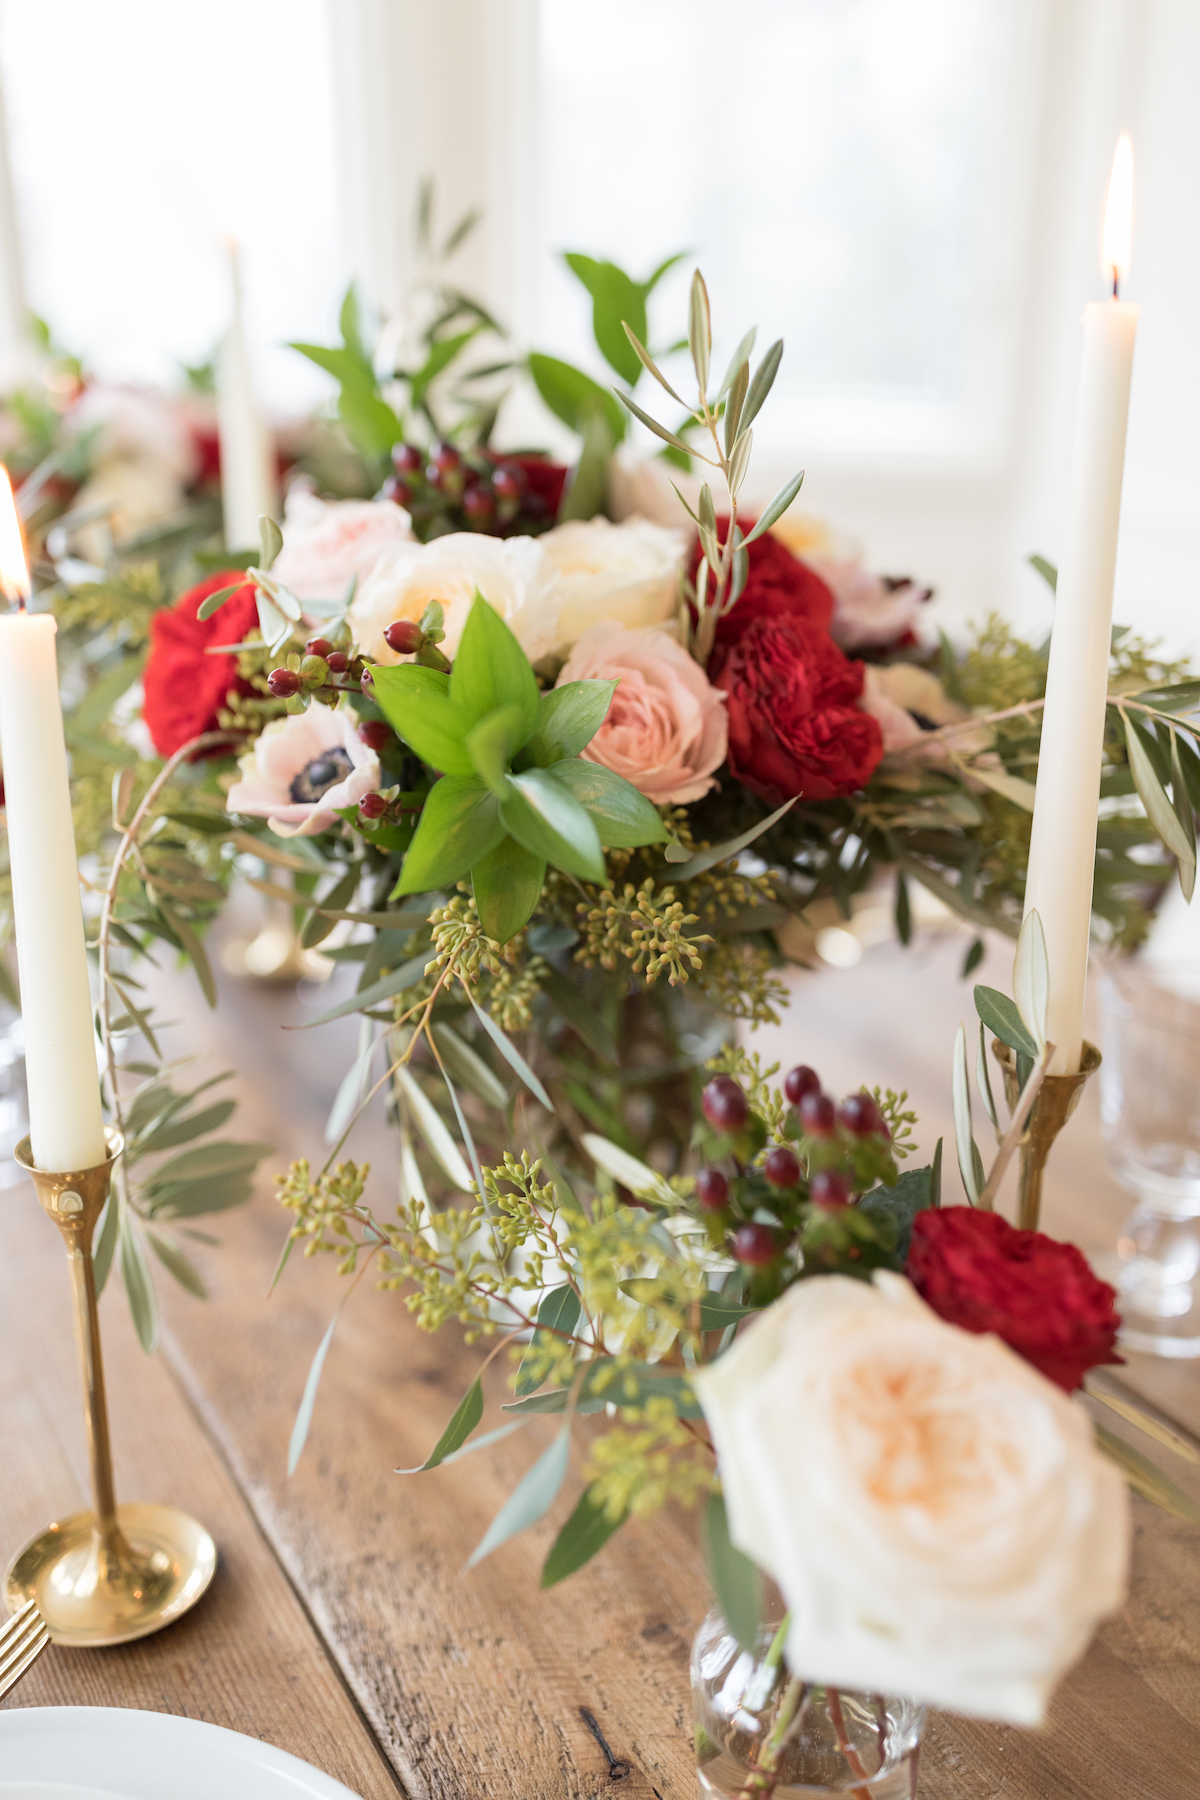 A Christmas centerpiece with flowers and candles on a wooden table.